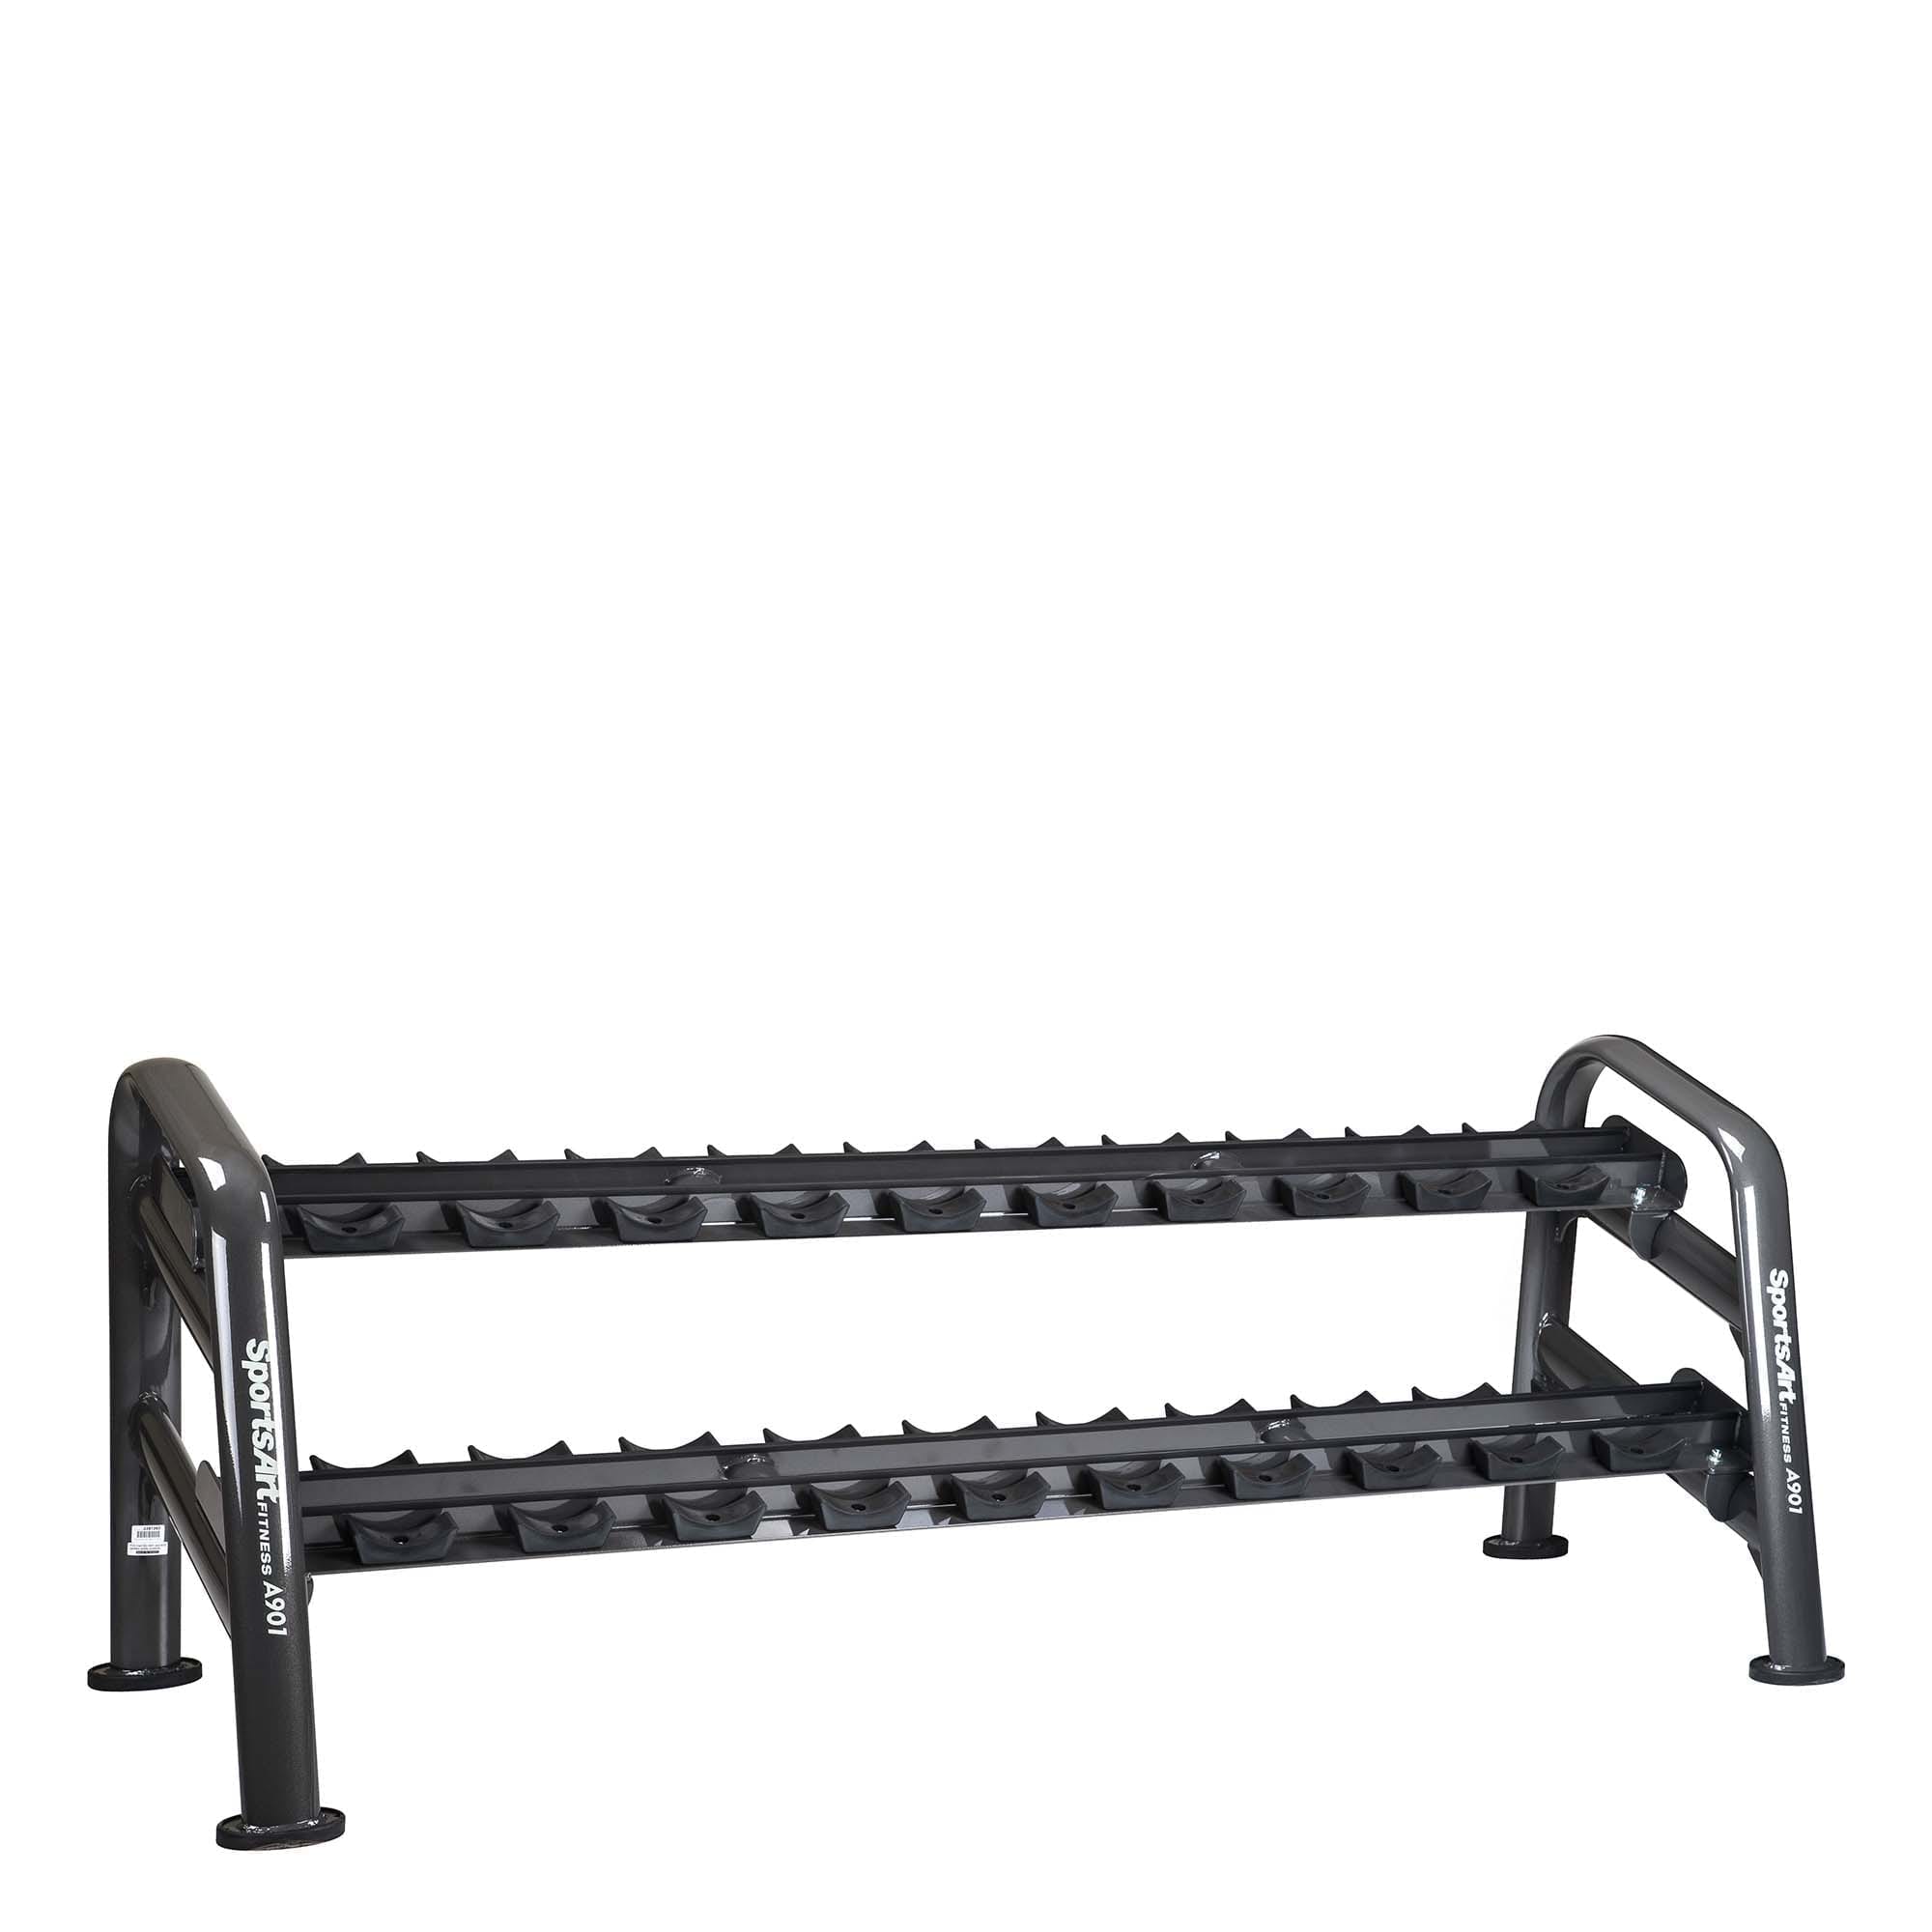 STATUS SERIES 10 PAIR PRO STYLE 2-TIER DUMBBELL RACK - SPORTSART (A901)